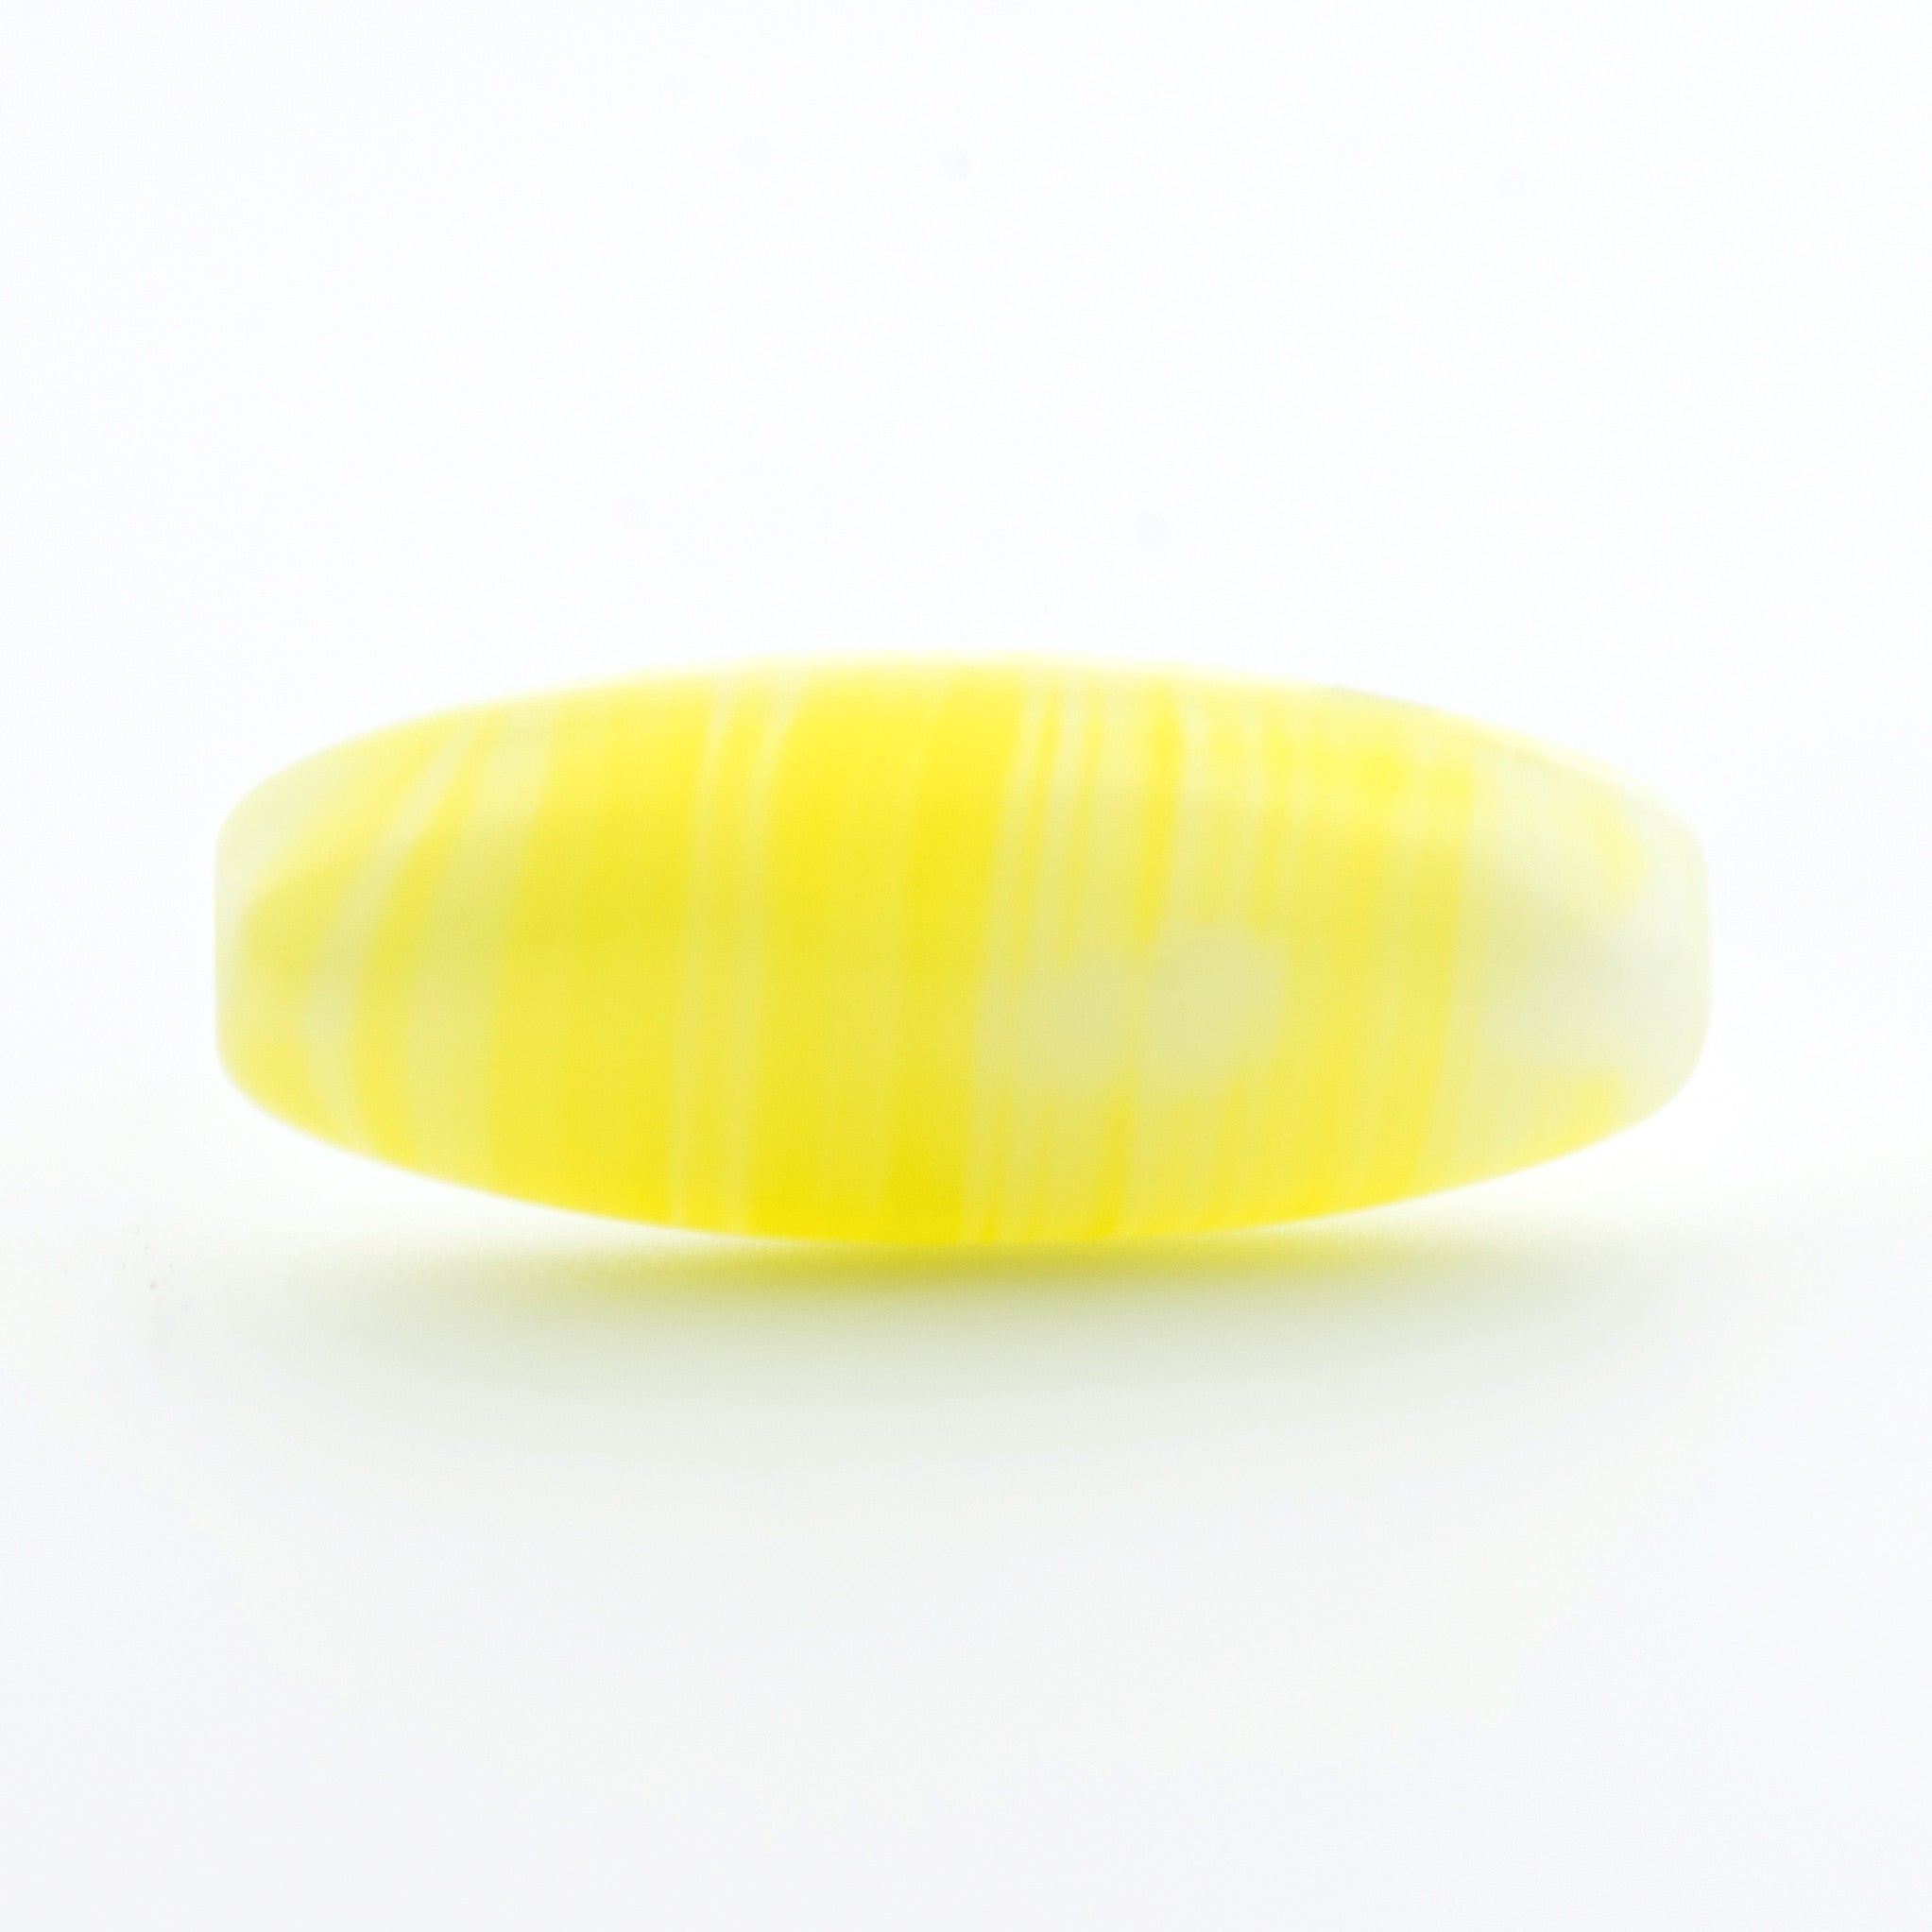 14X6MM Yellow Glass Oval Bead (144 pieces)